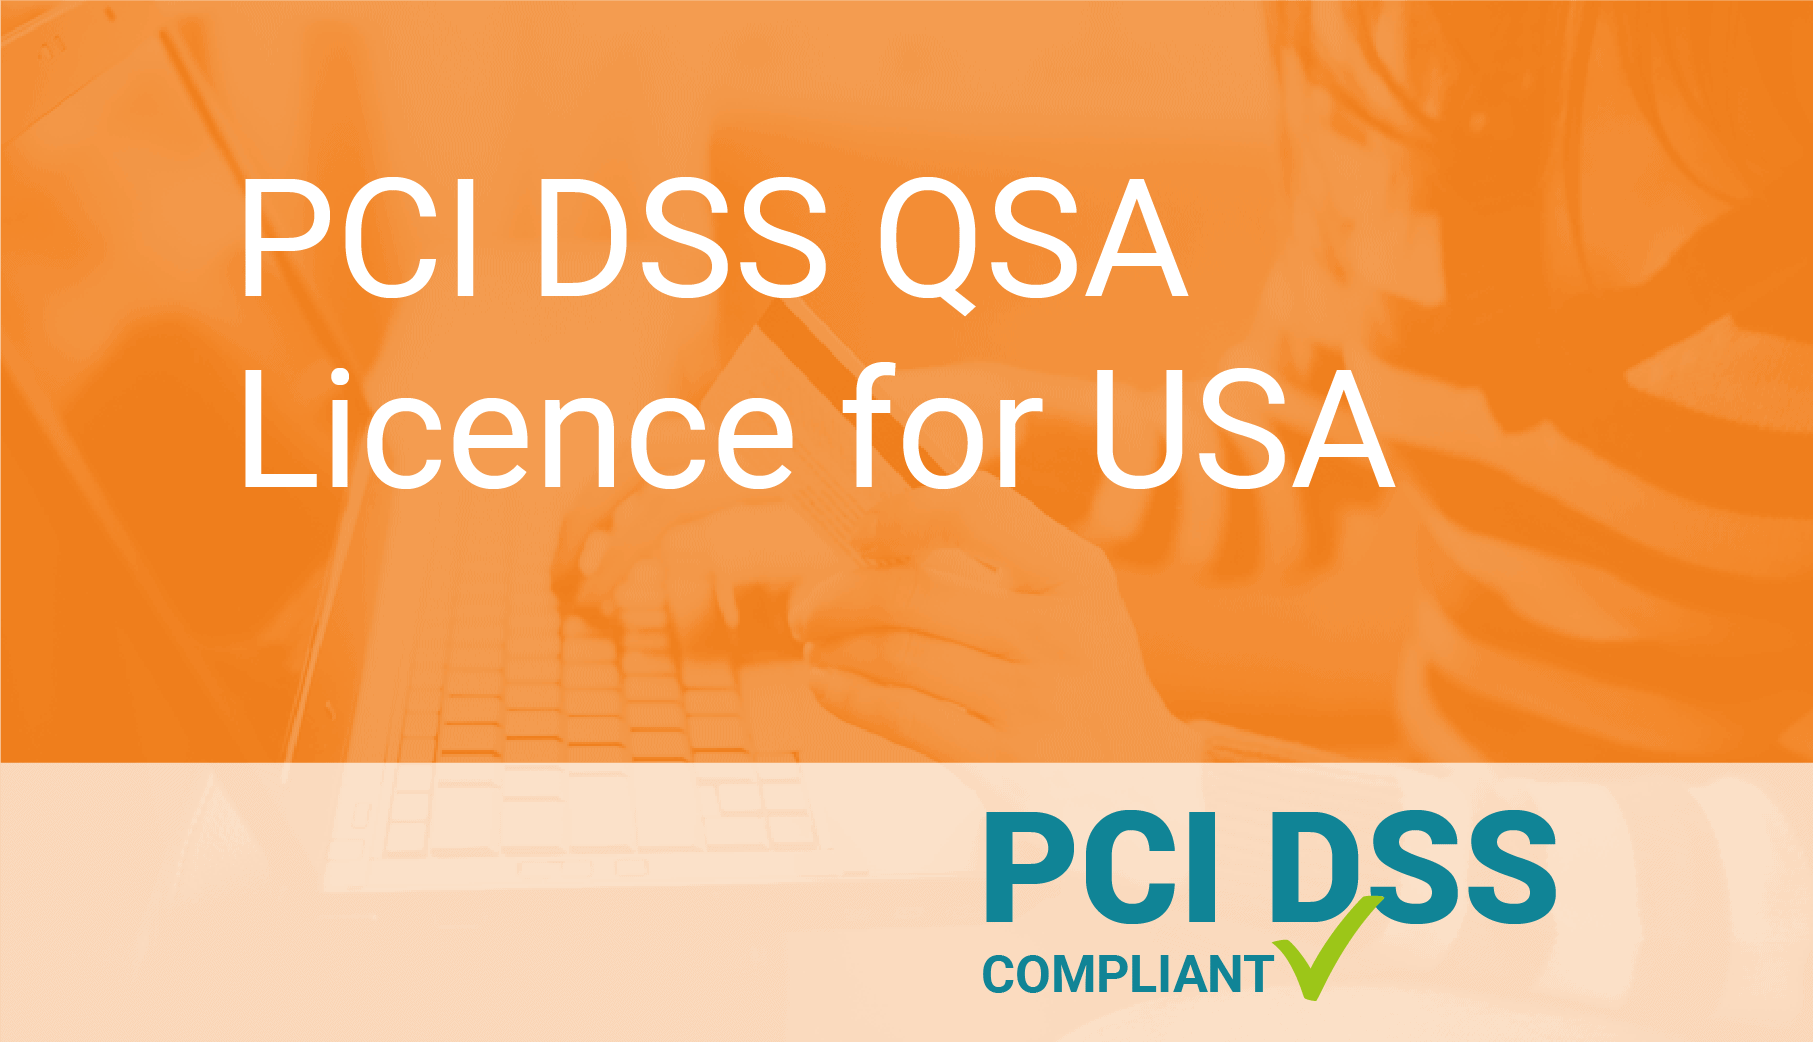 usd Receives PCI DSS QSA License for US